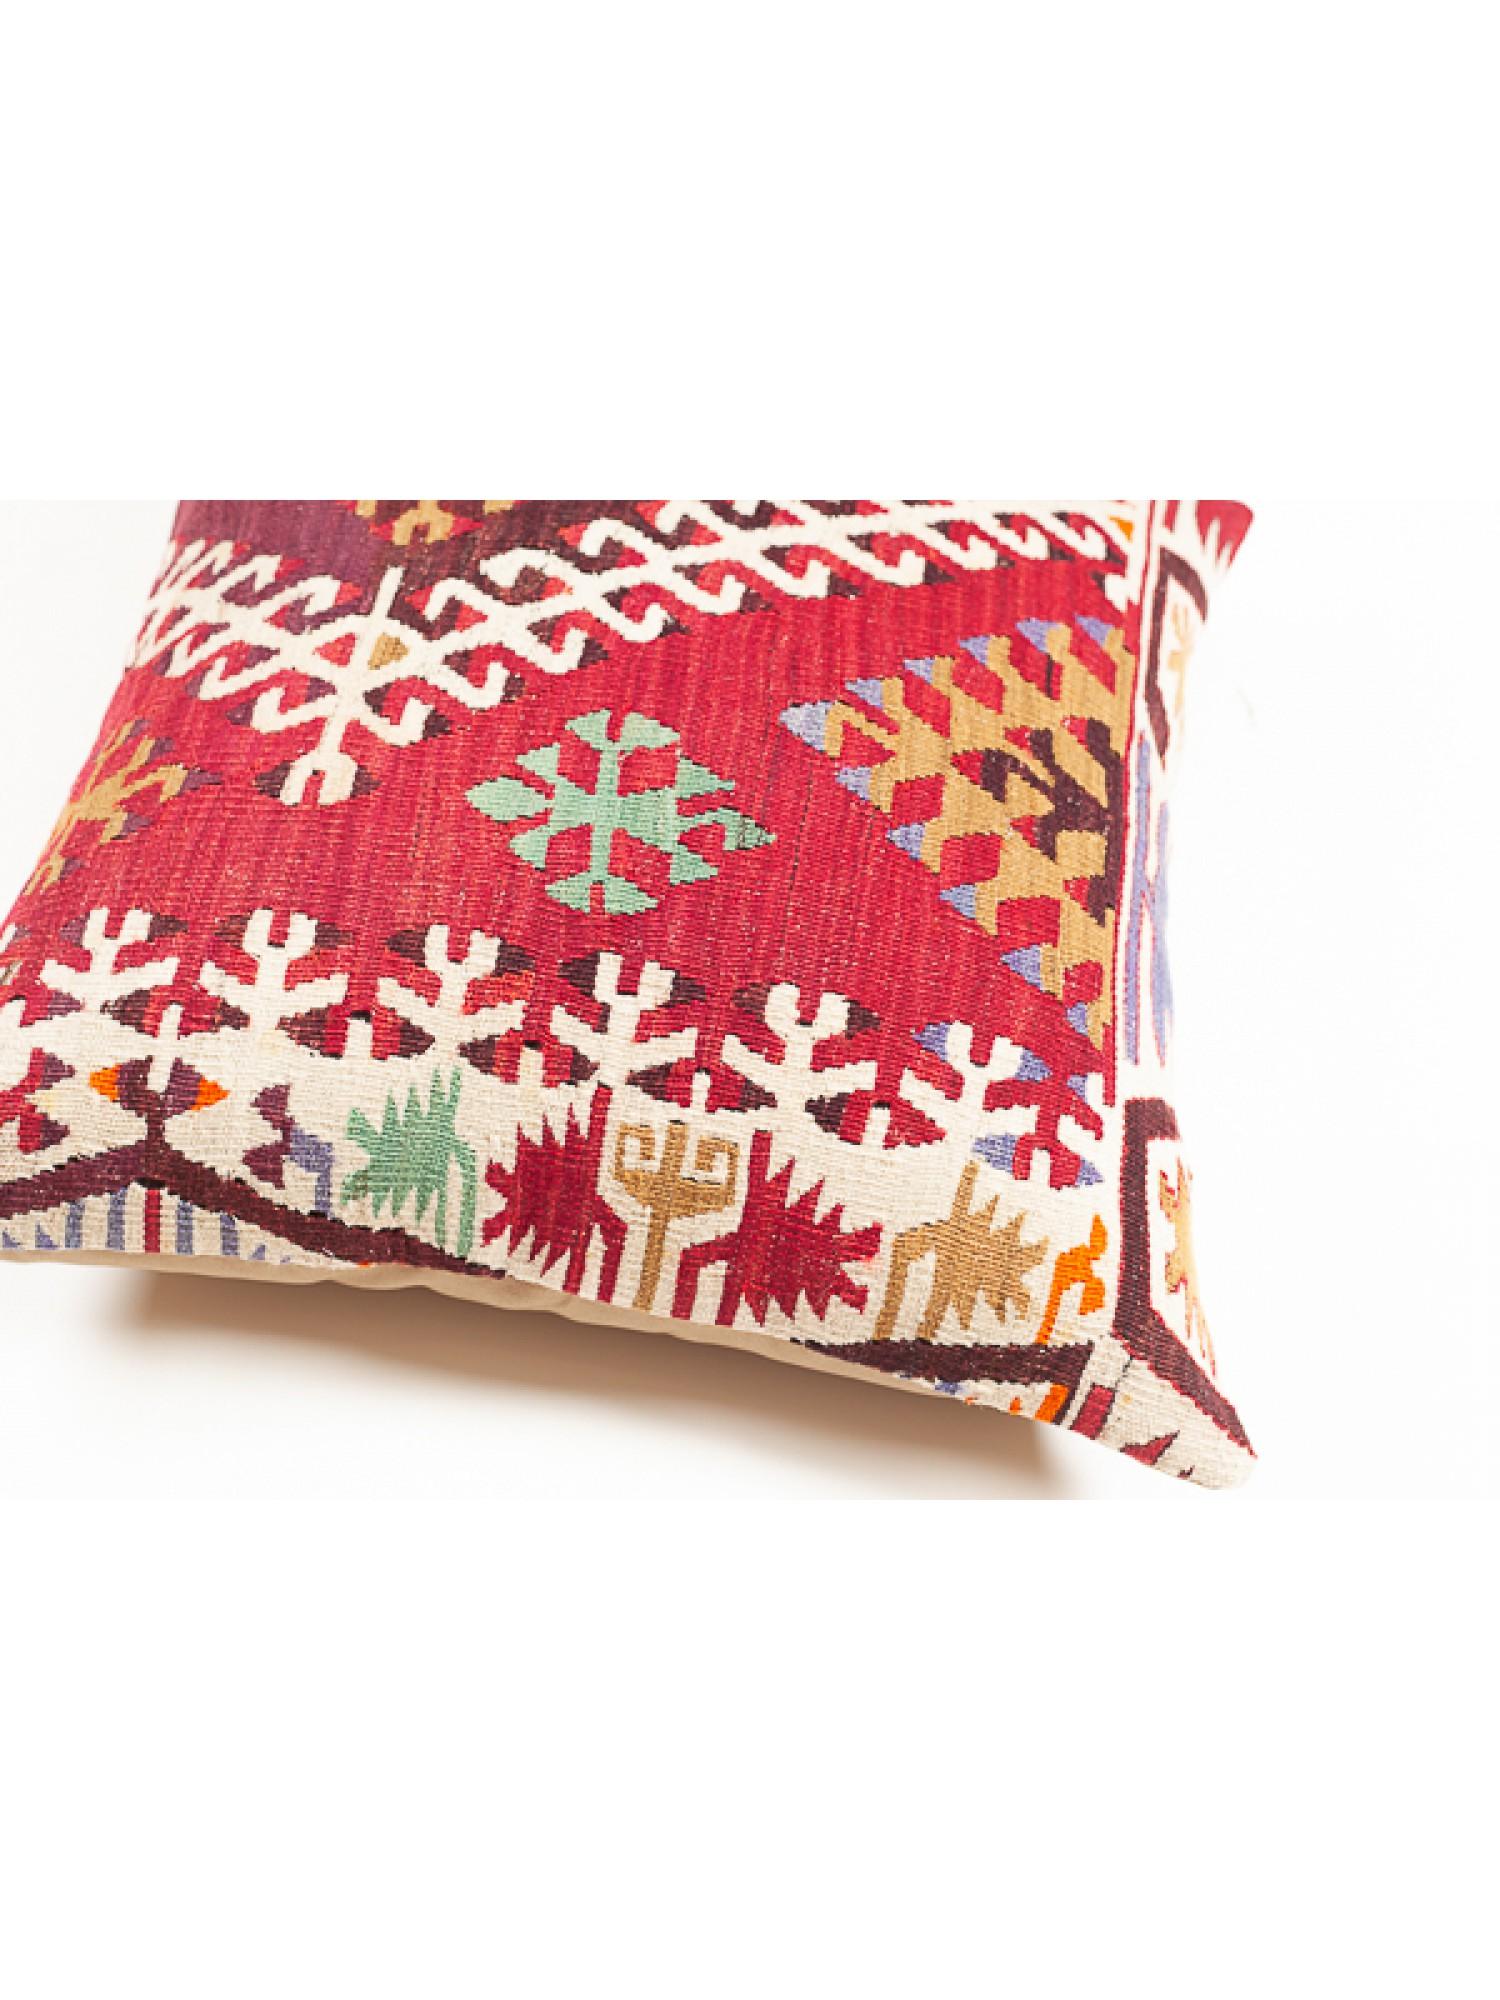 Hand-Woven Antique & Old Kilim Cushion Cover, Turkish Yastik Modern Pillow KC3539 For Sale